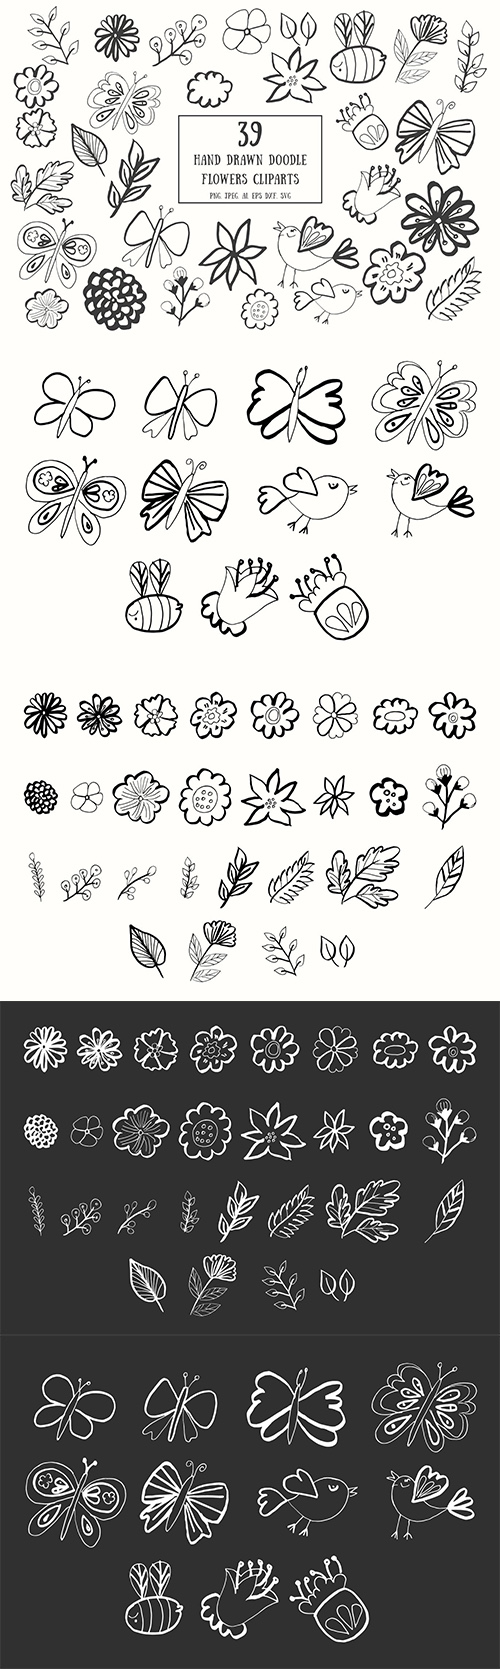 35+ Handdrawn Doodle Flowers Vector Cliparts